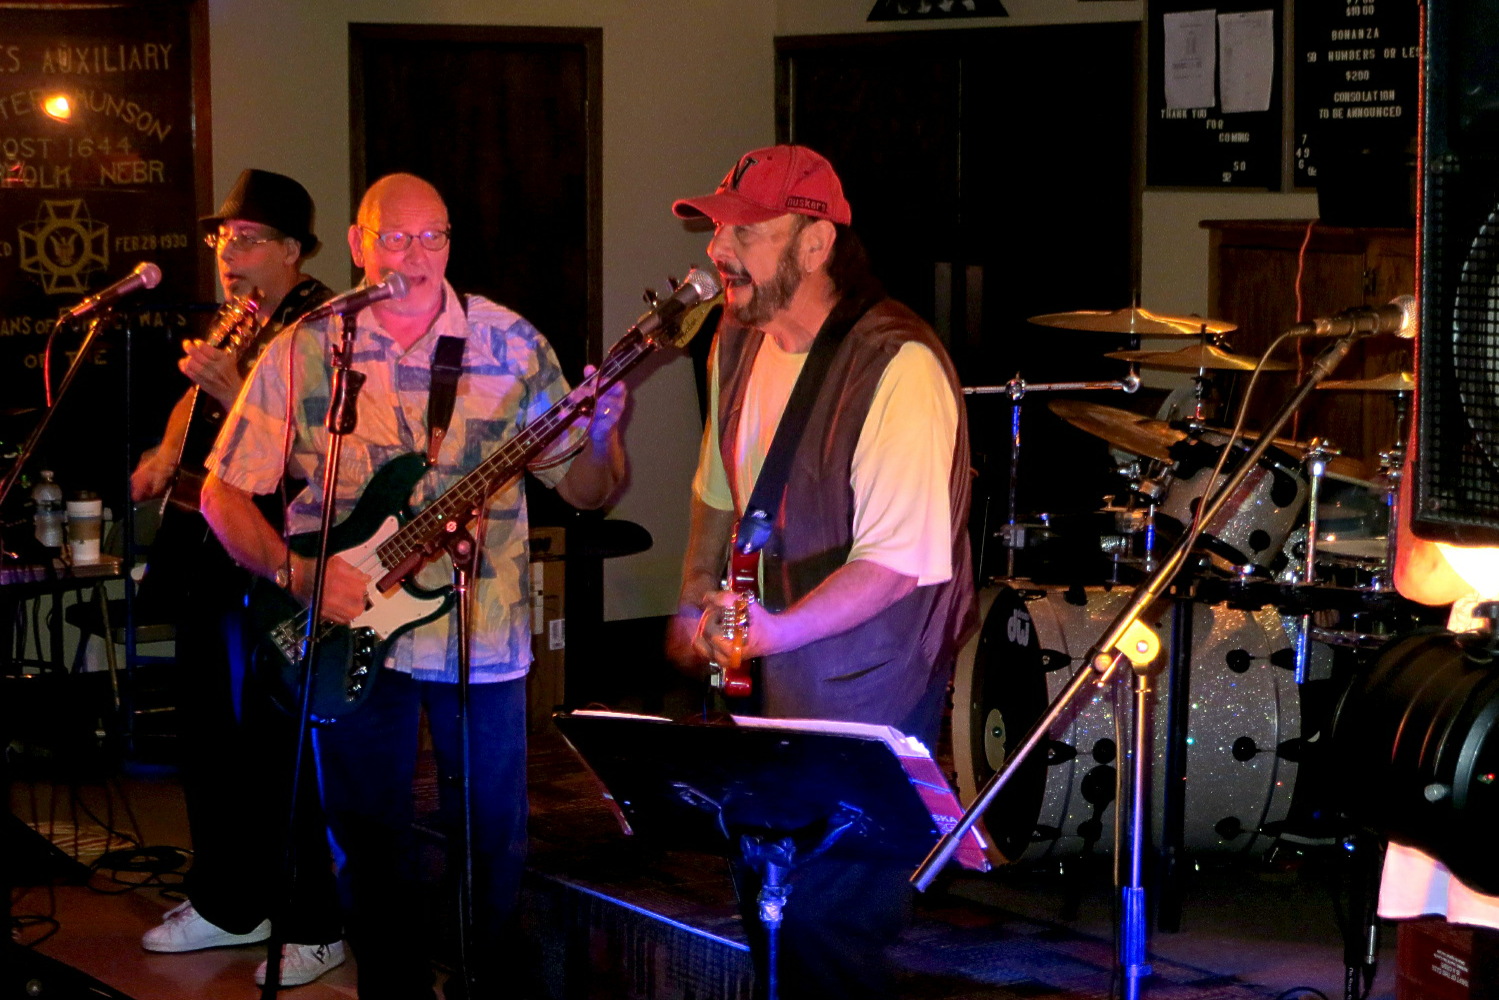 Live Music in Norfolk, NE - 
						Northeast Nebraska Musicians Jim Casey & The Lightnin' Band, 
						performing live at the 
						Halloween Dance & Costume Party at the 
						Norfolk VFW in Norfolk, Nebraska  
						on Saturday, October 31, 2015